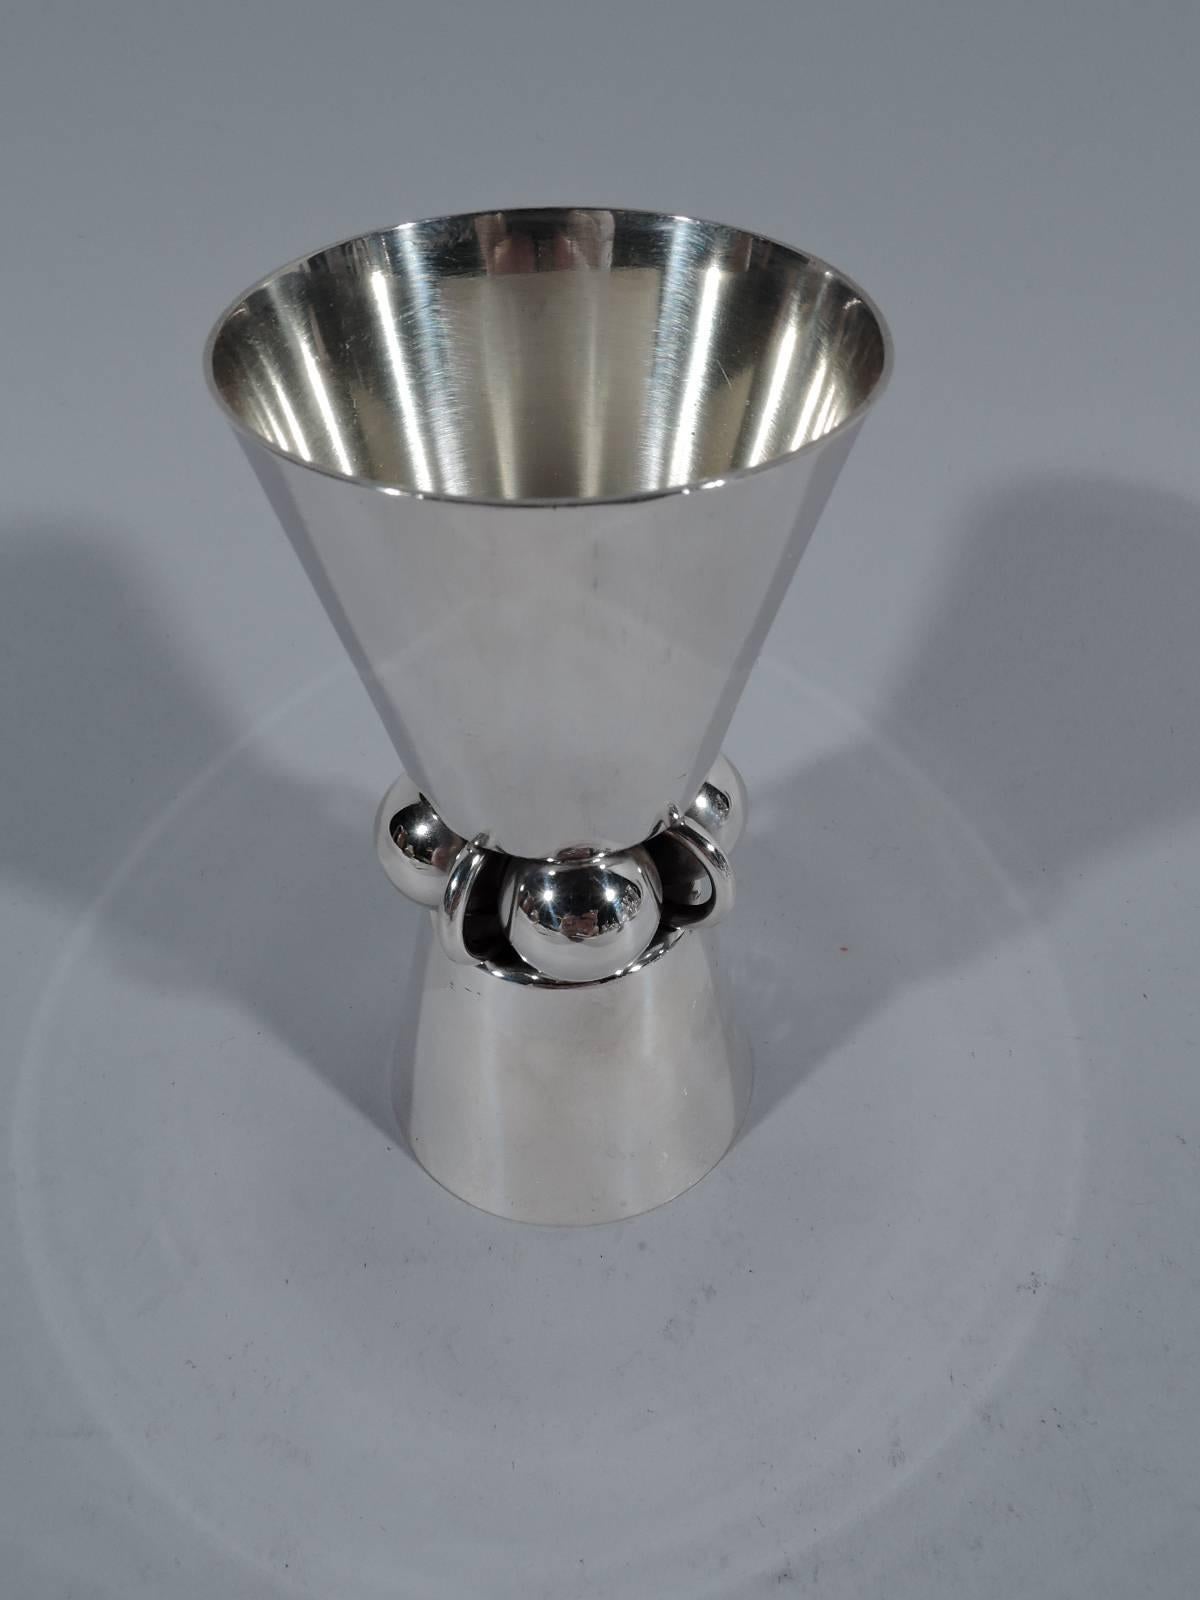 Mid-Century Modern sterling silver jigger. Made by Alphonse La Paglia for International in Meriden, Conn. Big and small truncated cones mounted back-to-back to Jensen-inspired knop with alternating beads and rings. A useful piece rich in period